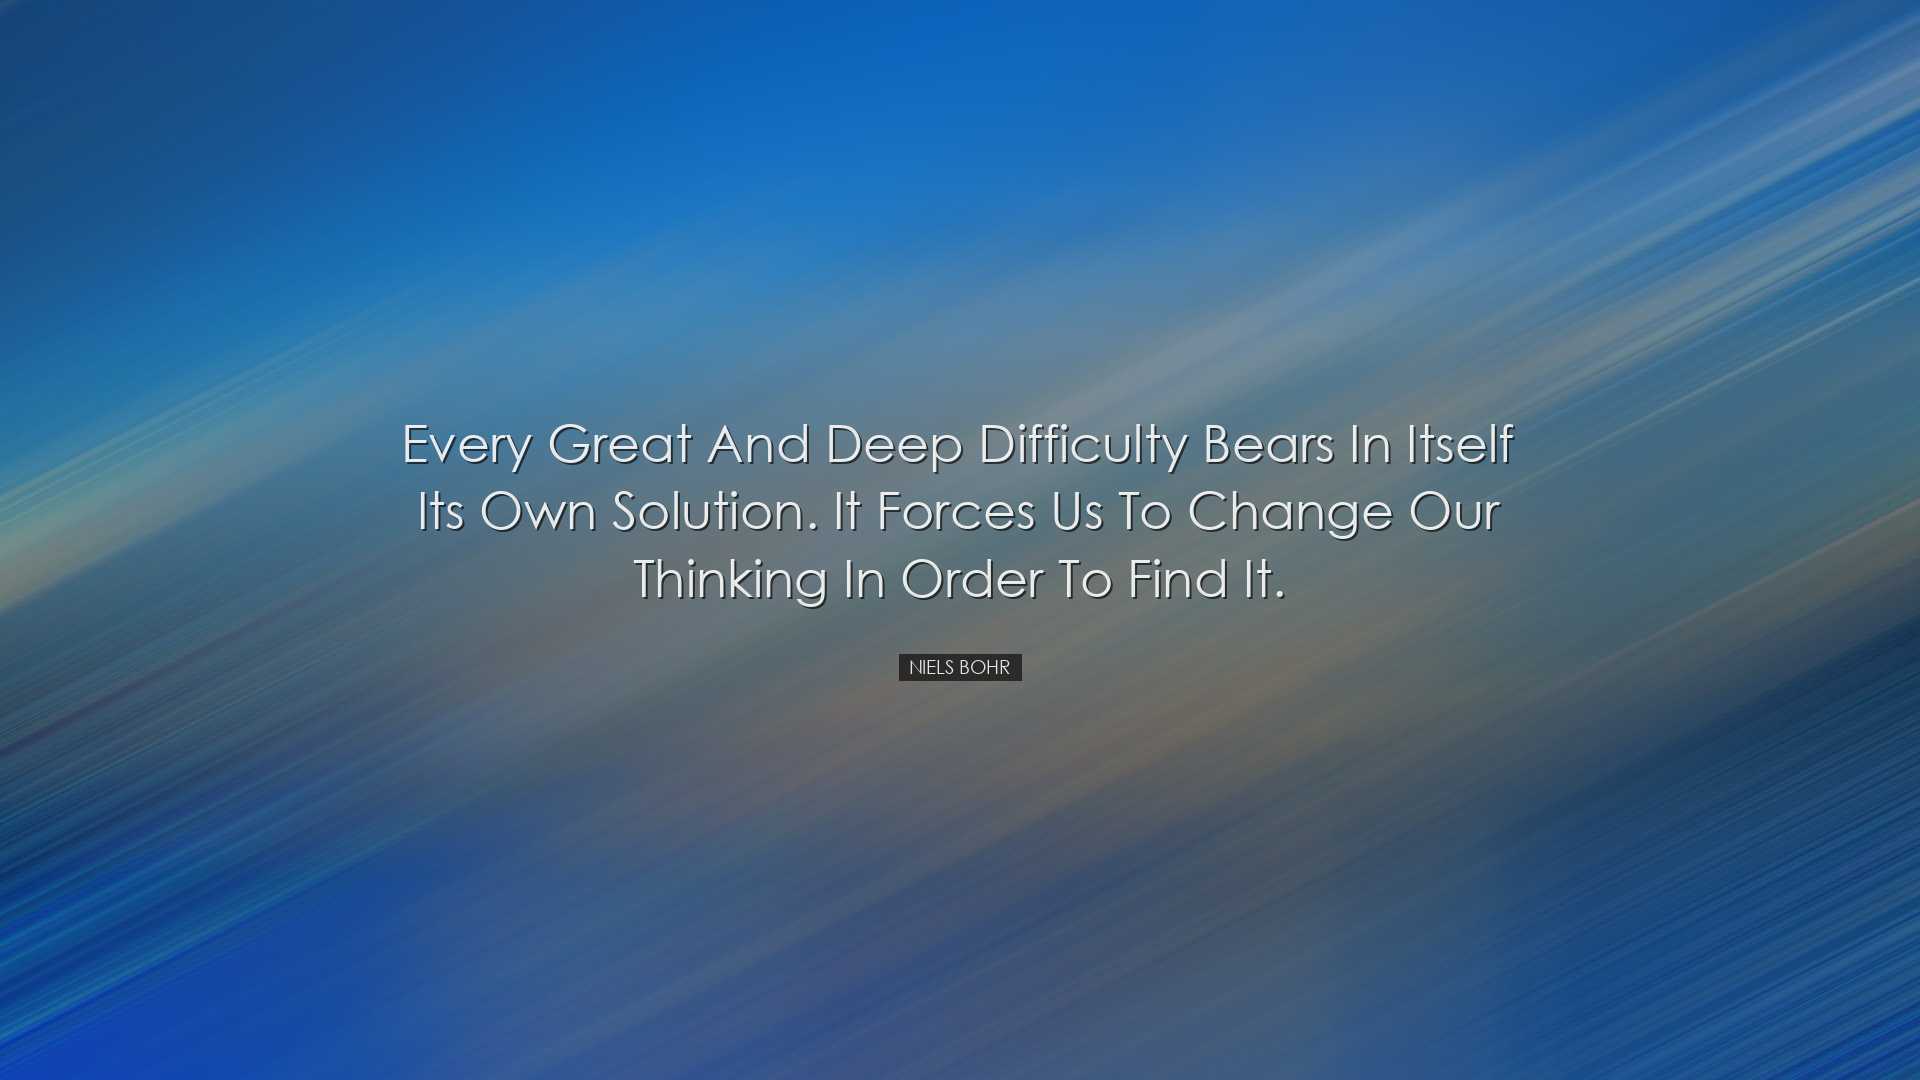 Every great and deep difficulty bears in itself its own solution.